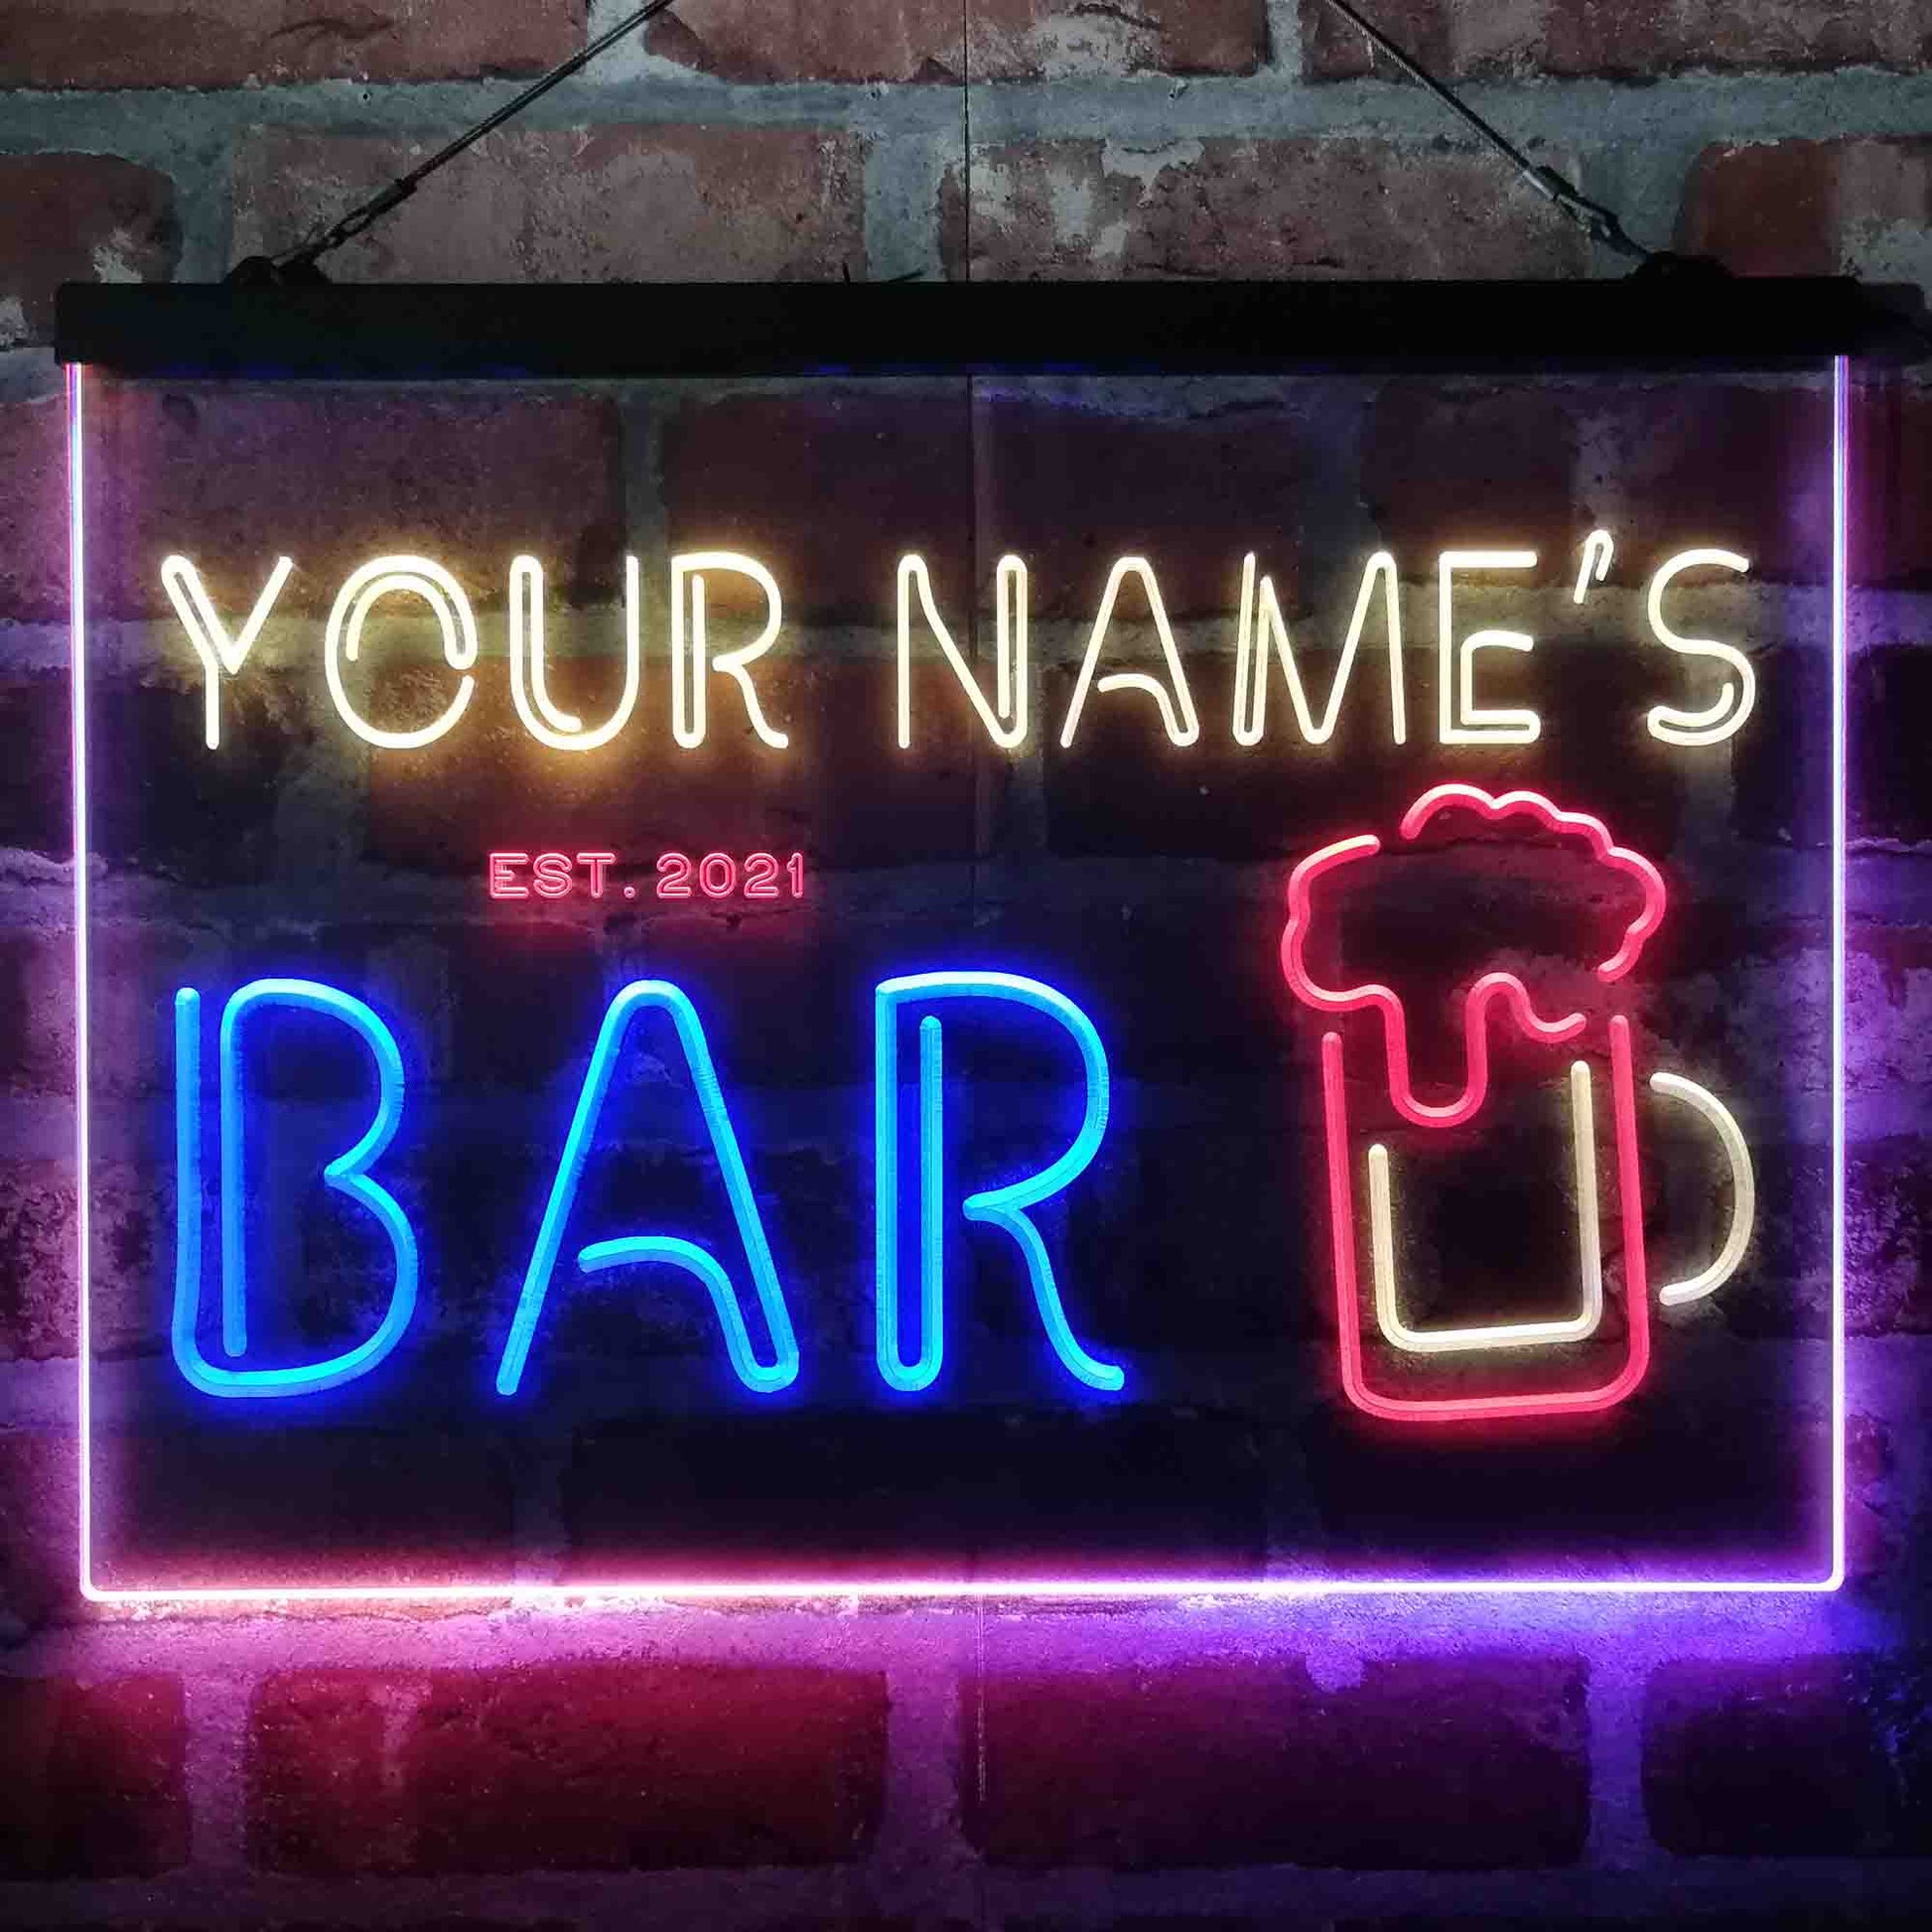 Personalized Pub Club Den Cabin 3-Color LED Neon Light Sign - Way Up Gifts